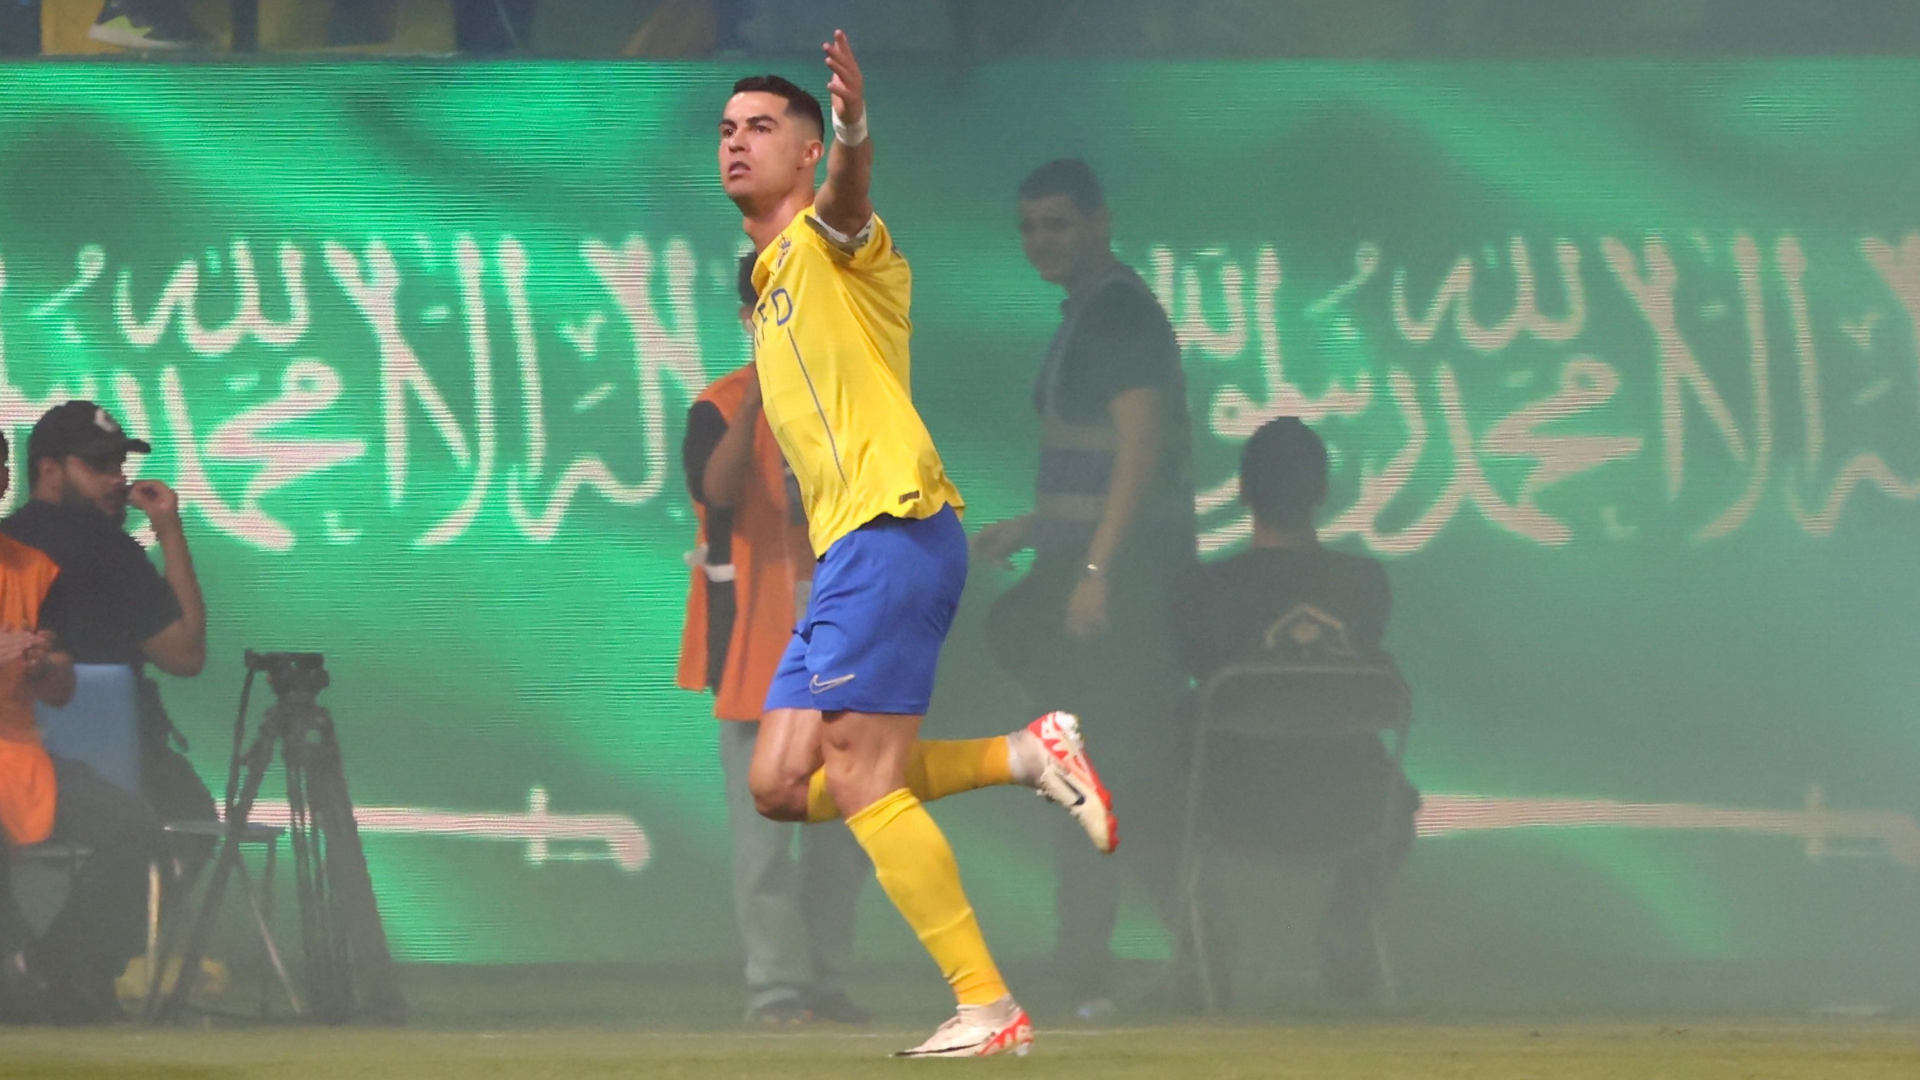 WATCH: Through the smoke! Ronaldo finds the back of the net for Al-Nassr despite fanfare obstruction from the crowd!